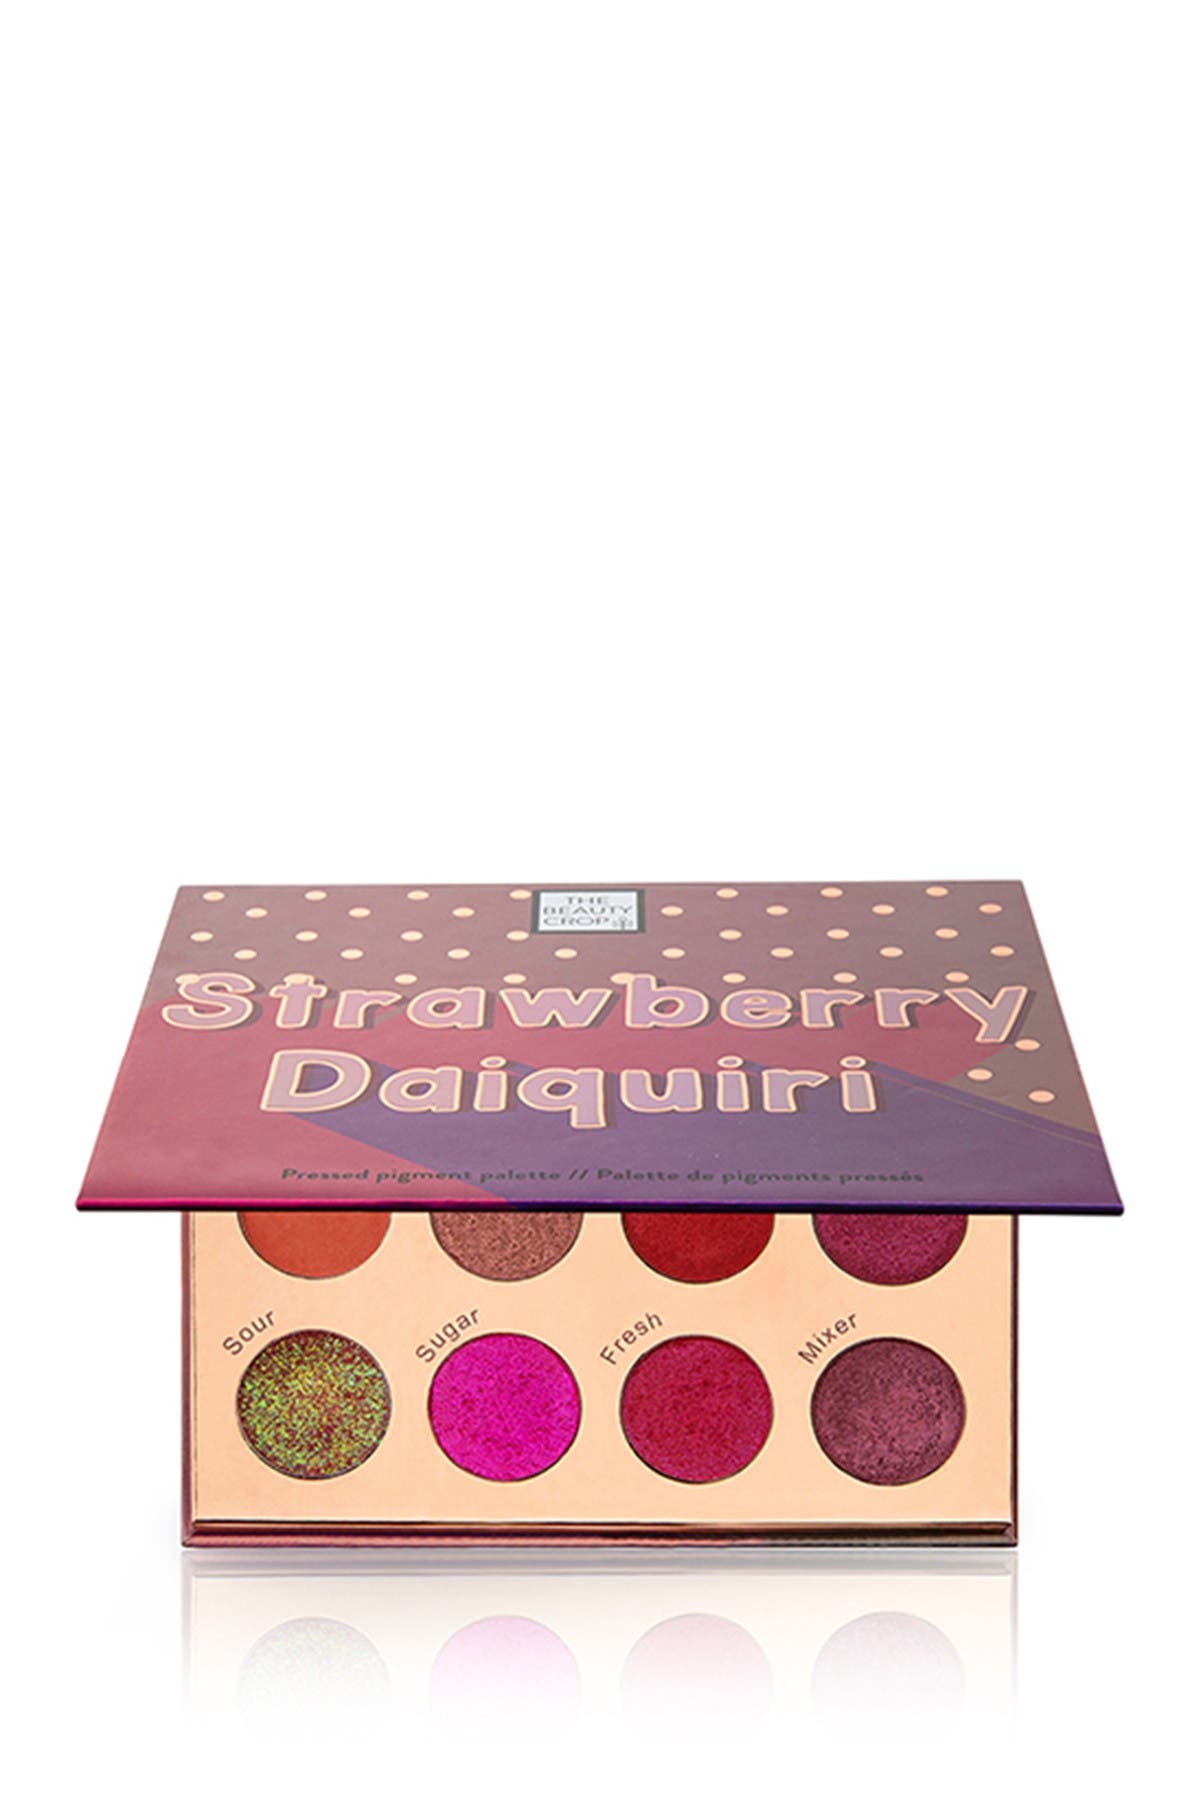 The Beauty Crop Cocktail Palette In Strawberry Daiquri